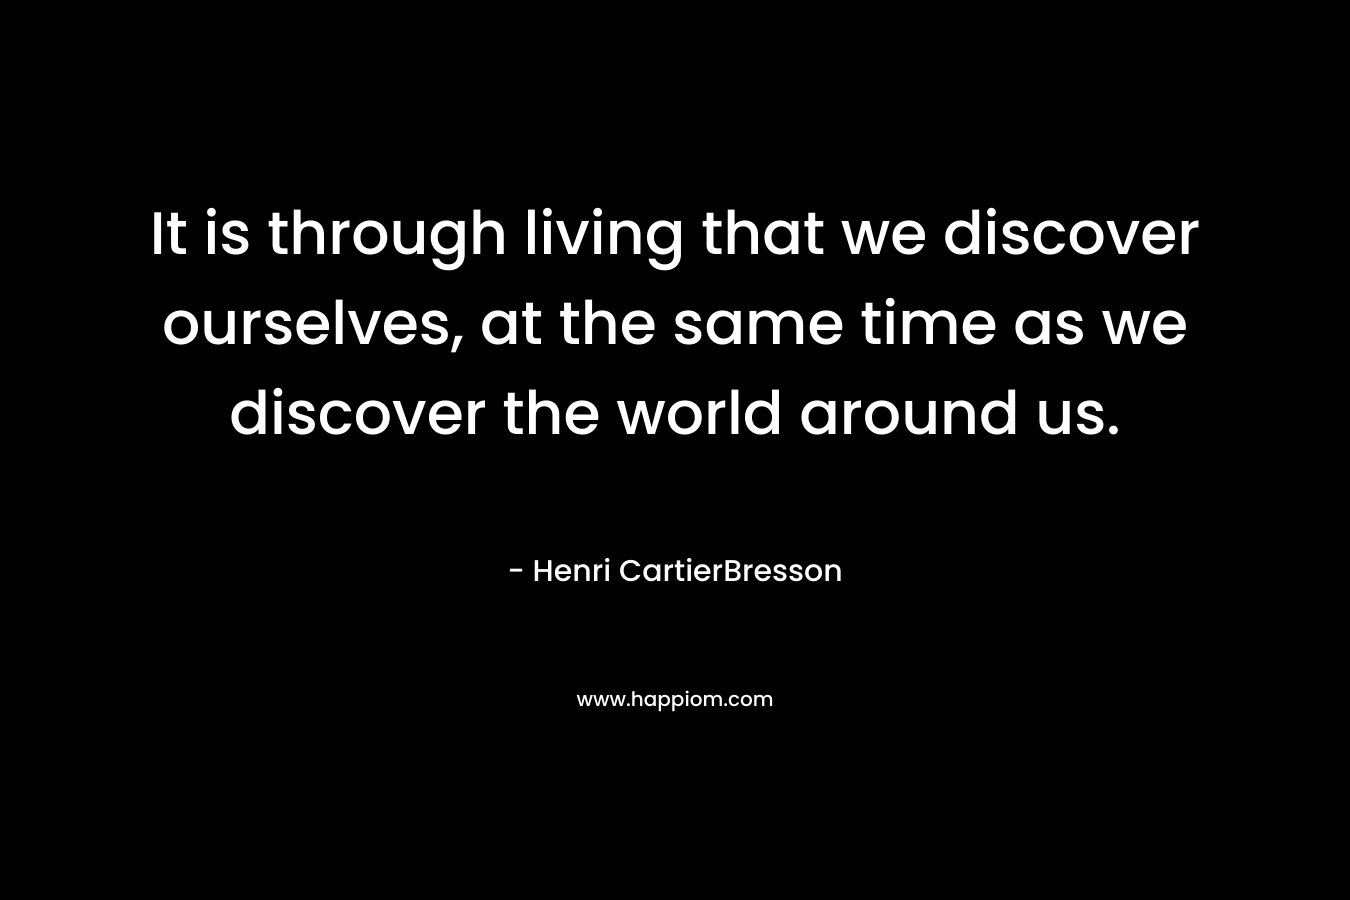 It is through living that we discover ourselves, at the same time as we discover the world around us.